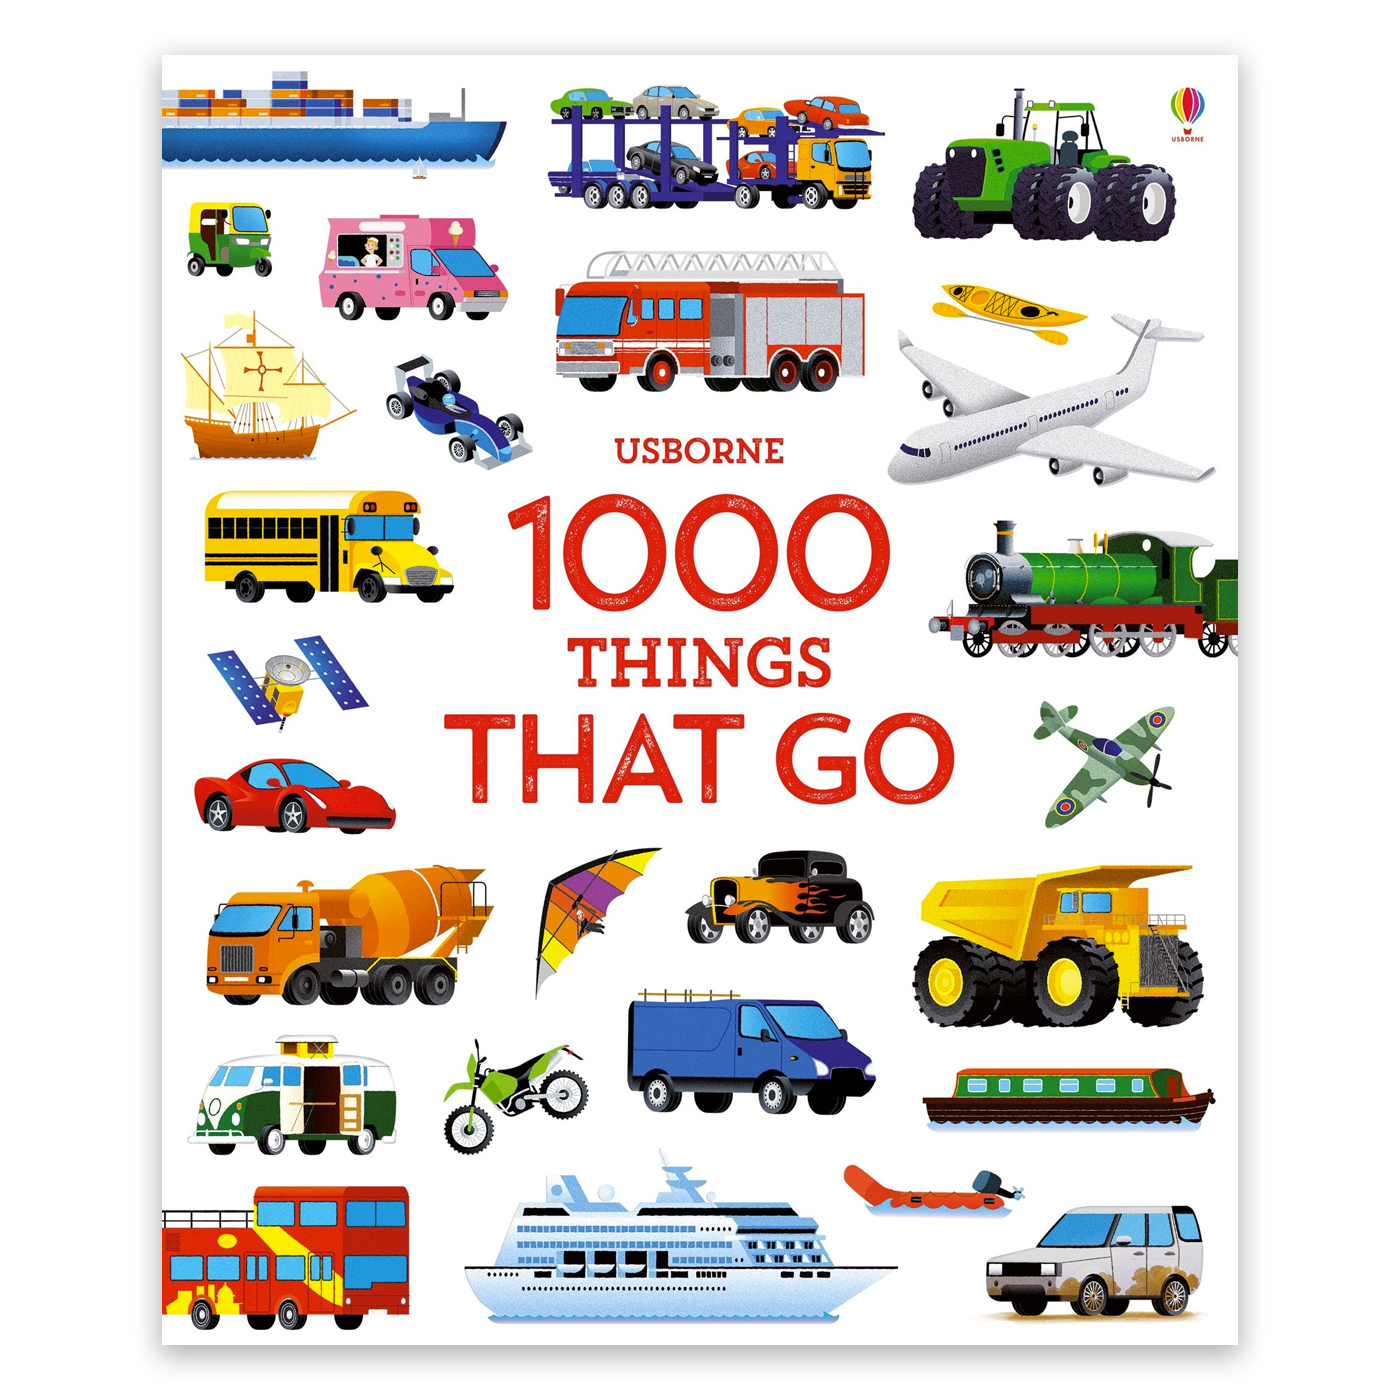  1000 Things That Go